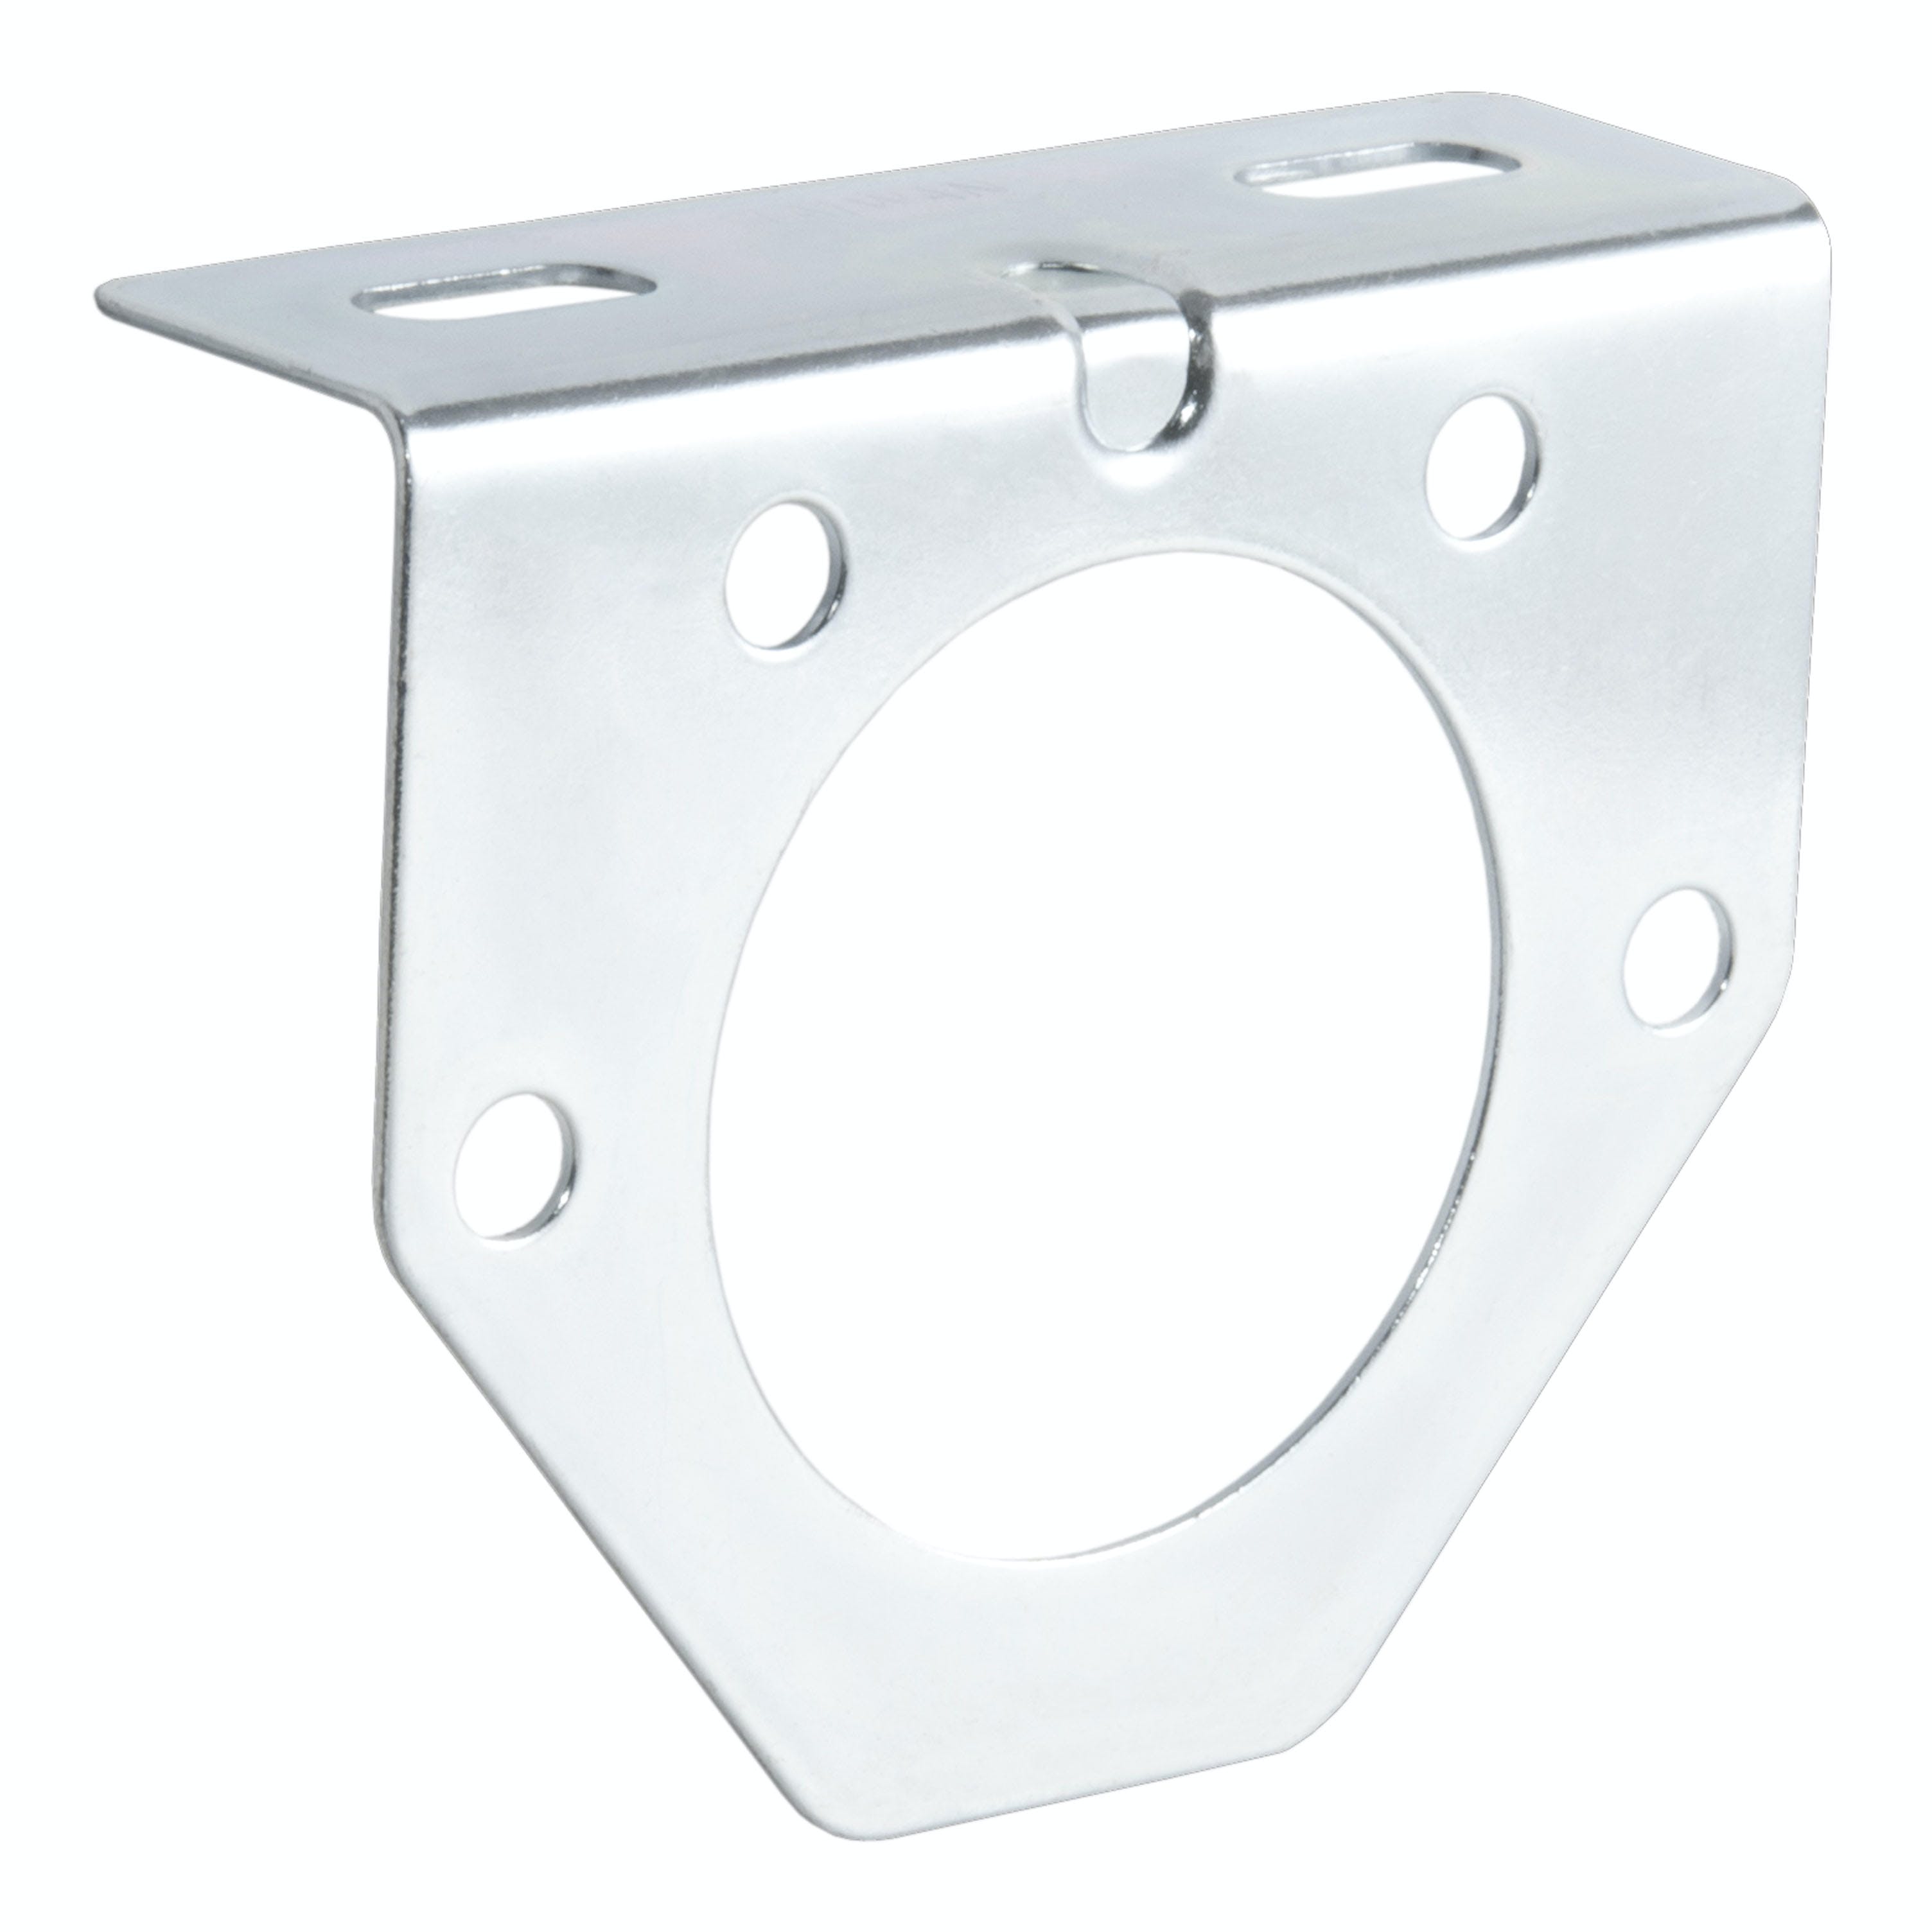 CURT 58222 Connector Mounting Bracket for 7-Way Round